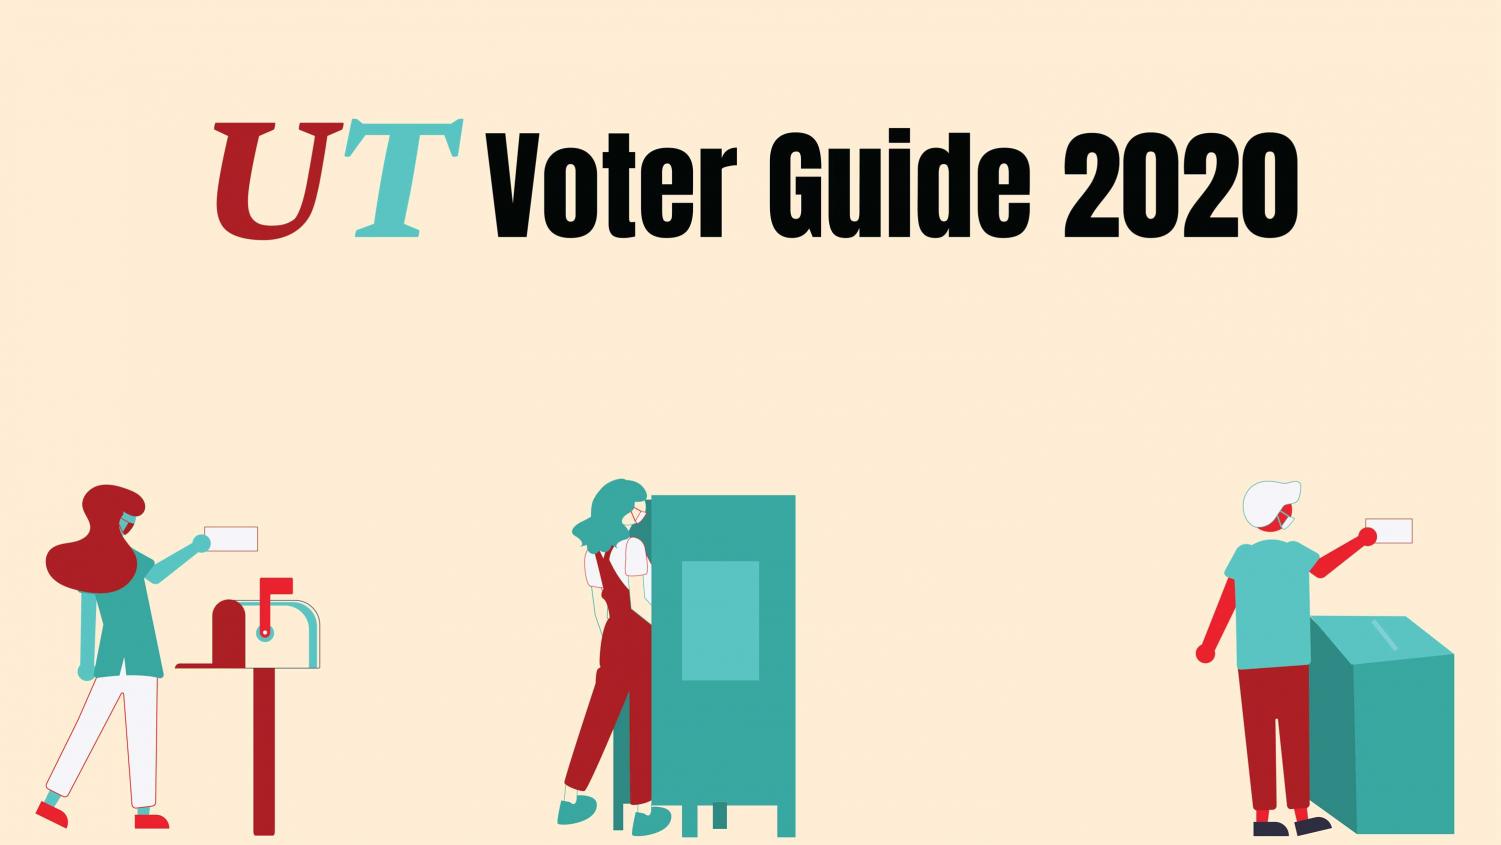 People with masks on voting by bail and in person and the words "UT Voter Guide 2020" on top.